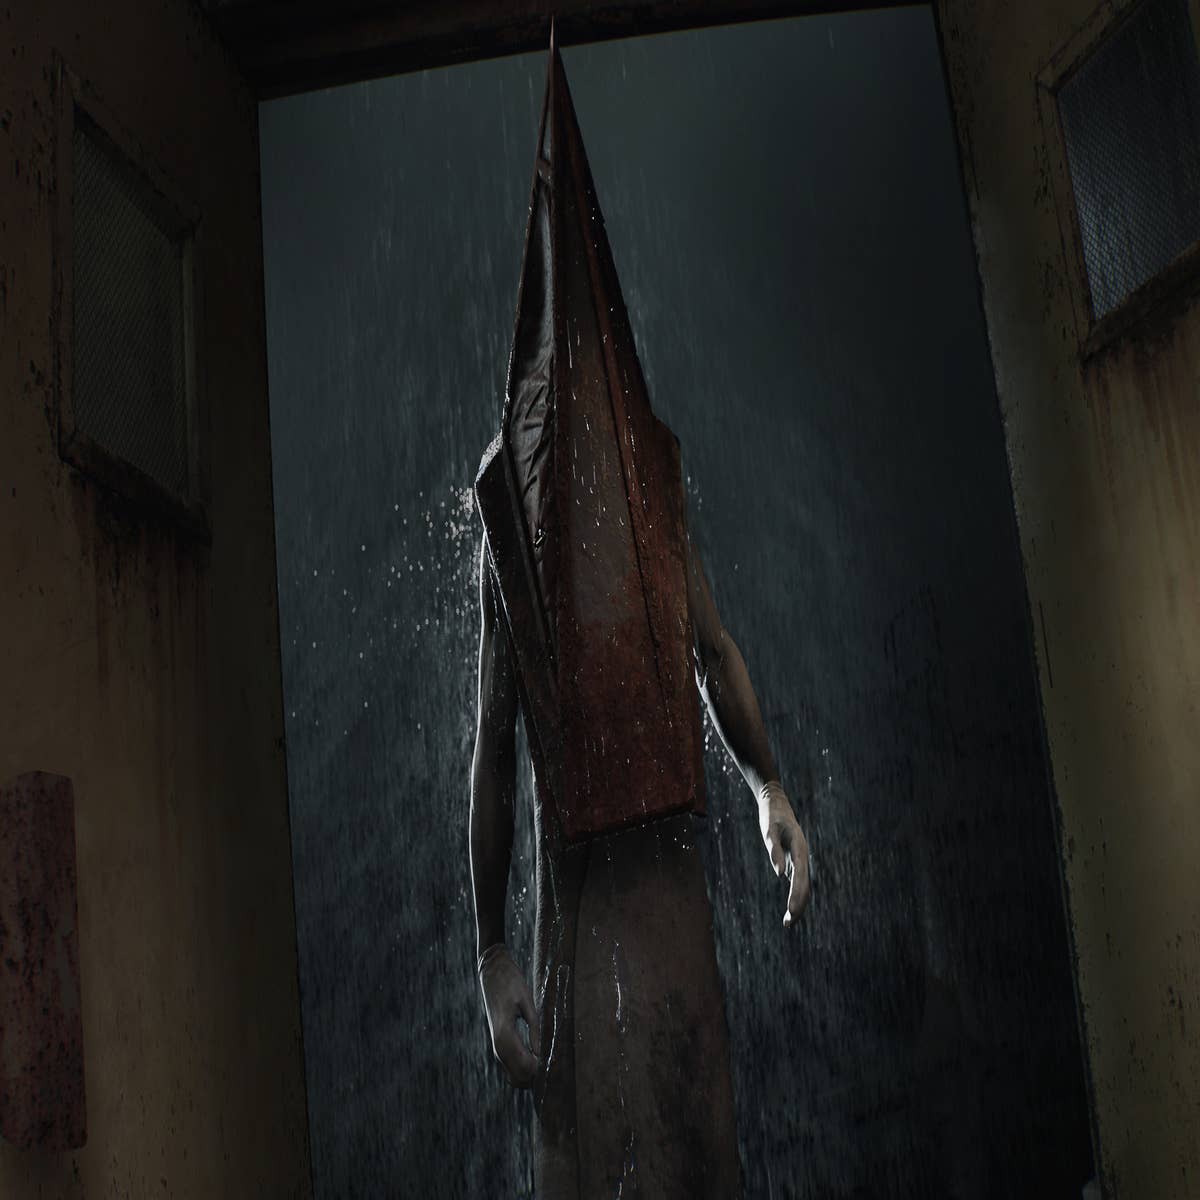 Silent Hill 2 Remake pre-order suggests an origin story for